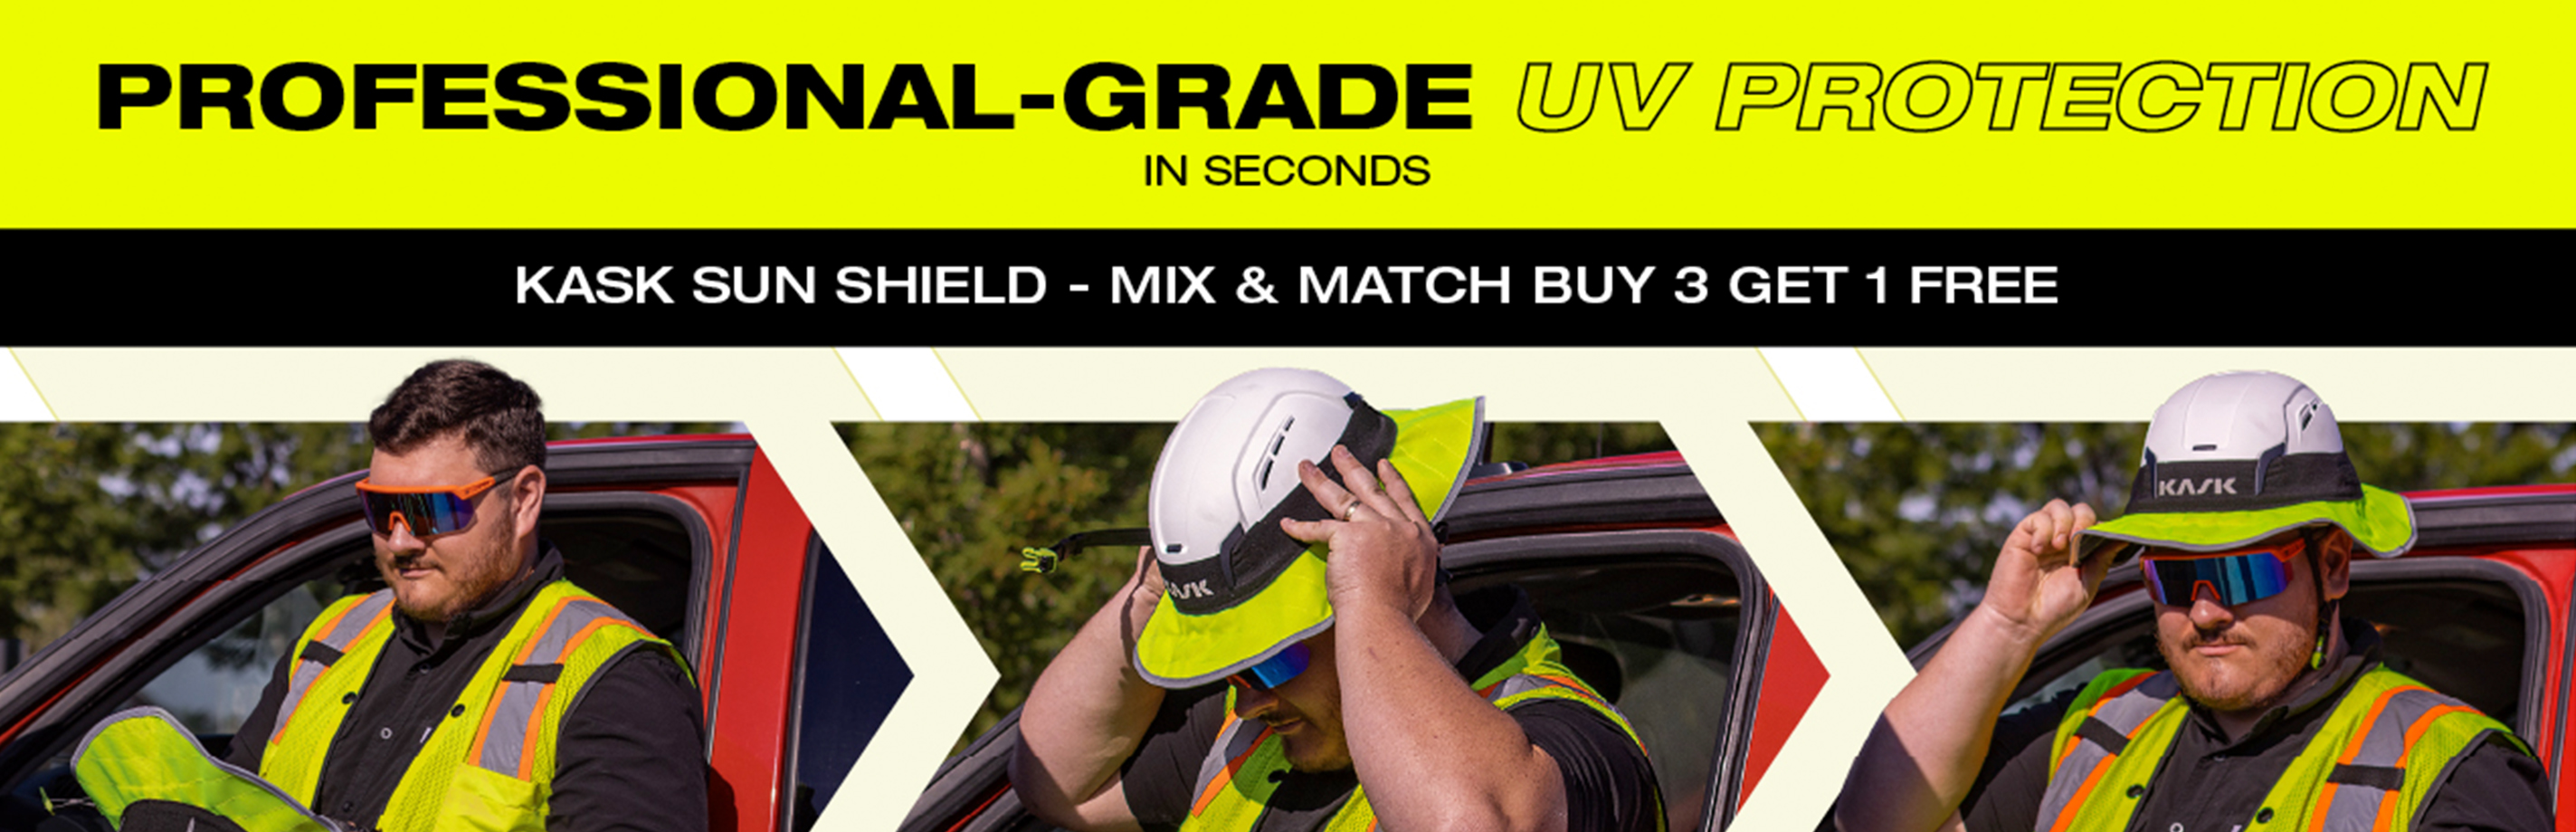  Buy 3 Get 1 Free on KASK Sun Shields through the month of July